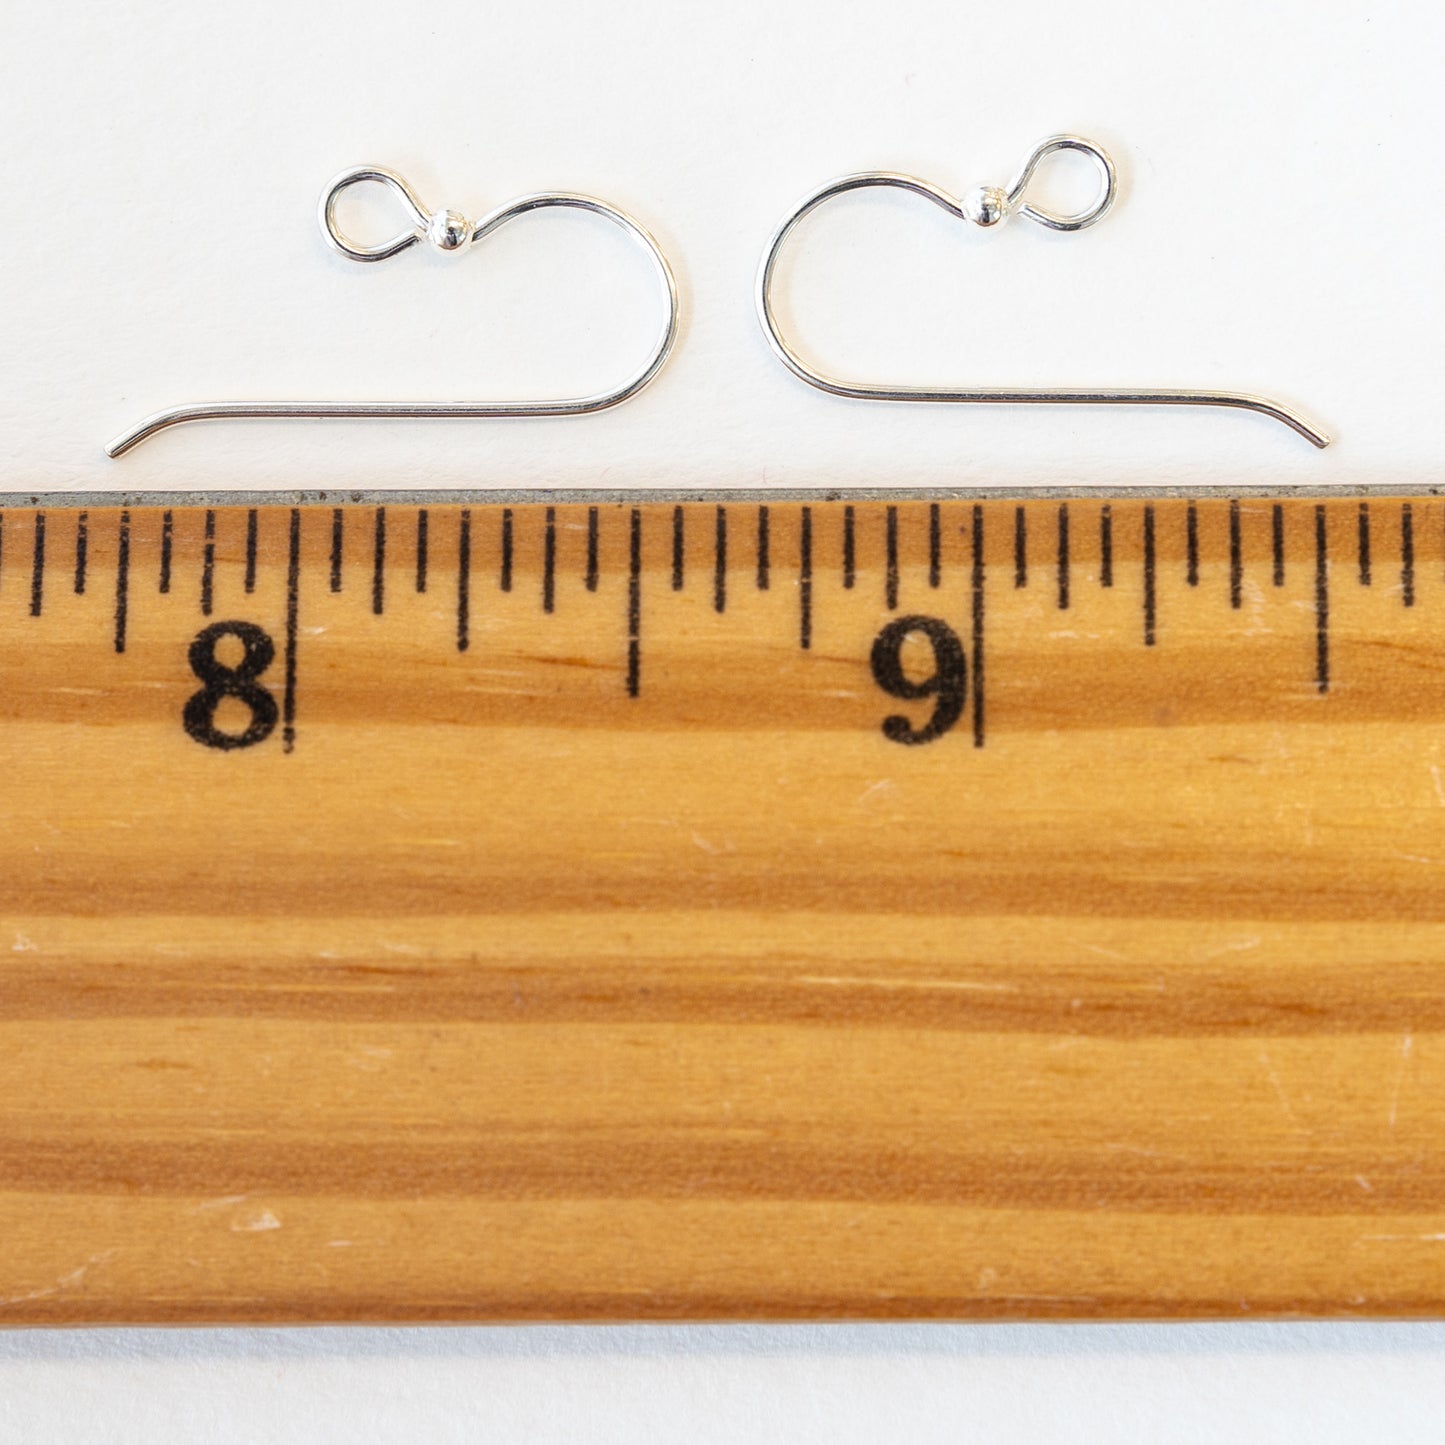 20g Sterling Silver Ear Wires with 2mm Ball